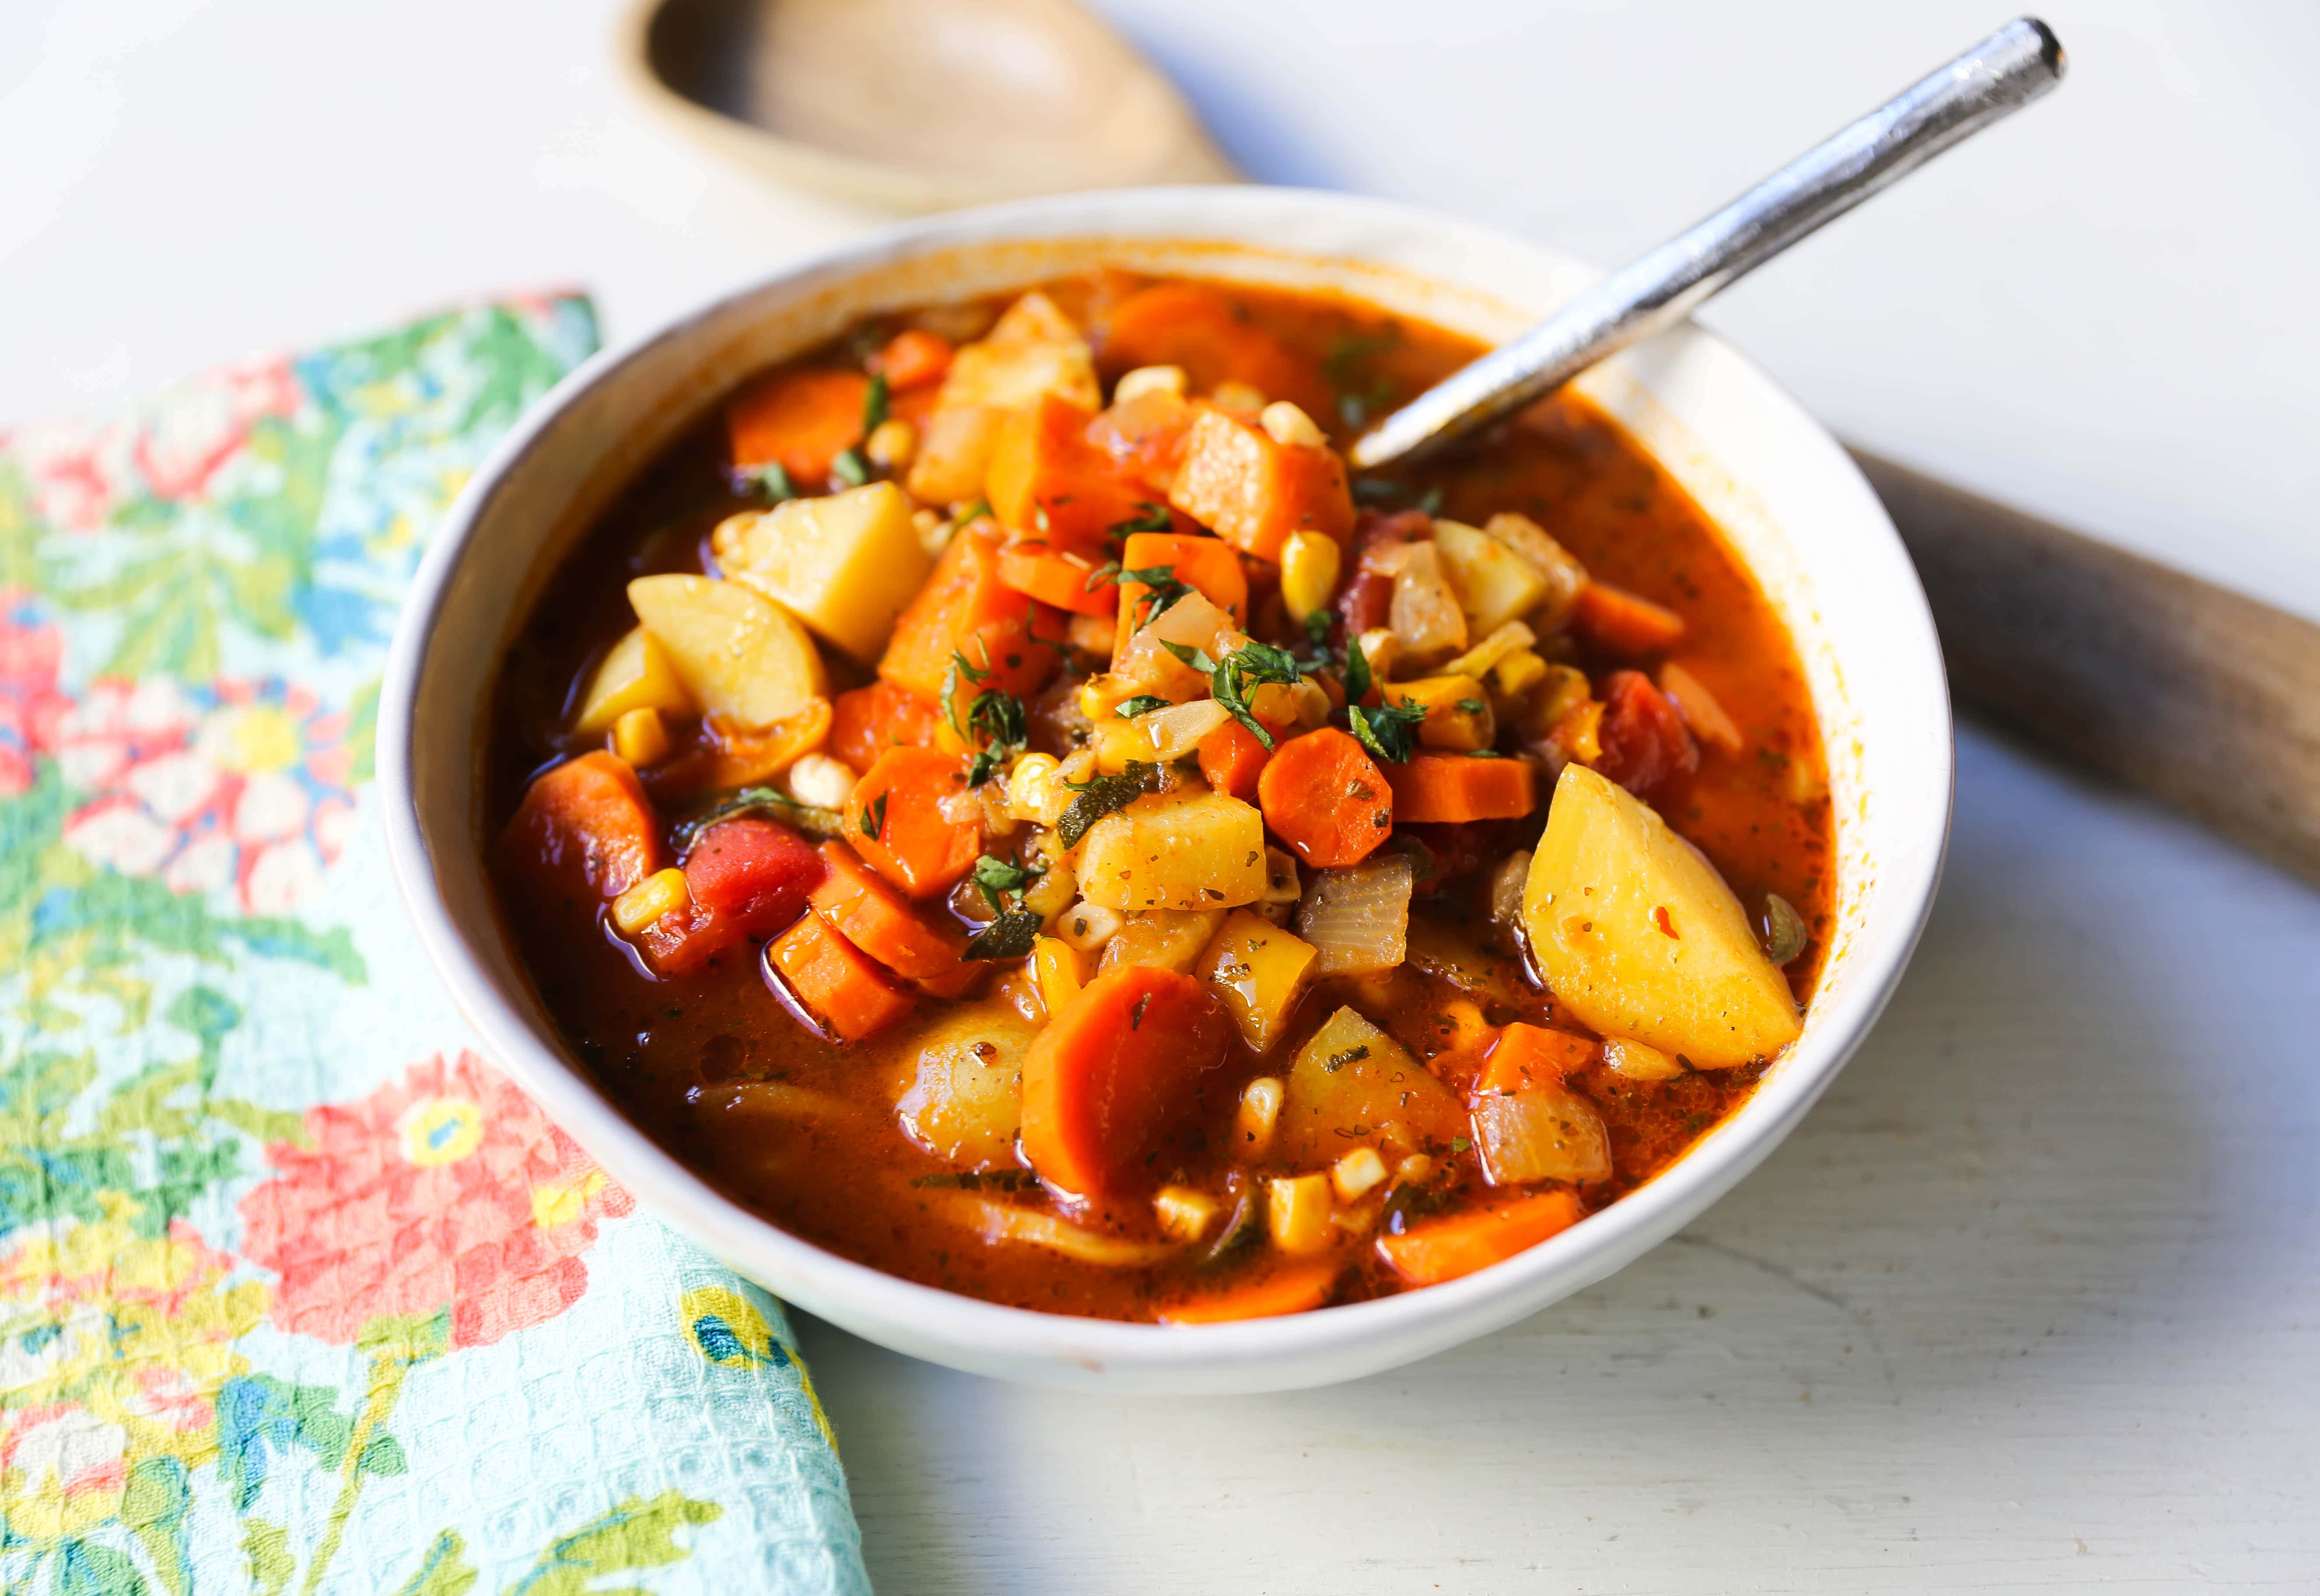 Detox Vegetable Soup. A healthy soup filled with vegetables, herbs, in a warm broth. How to make the best vegetable soup! www.modernhoney.com #vegetablesoup #veggiesoup #soups #soup #healthy